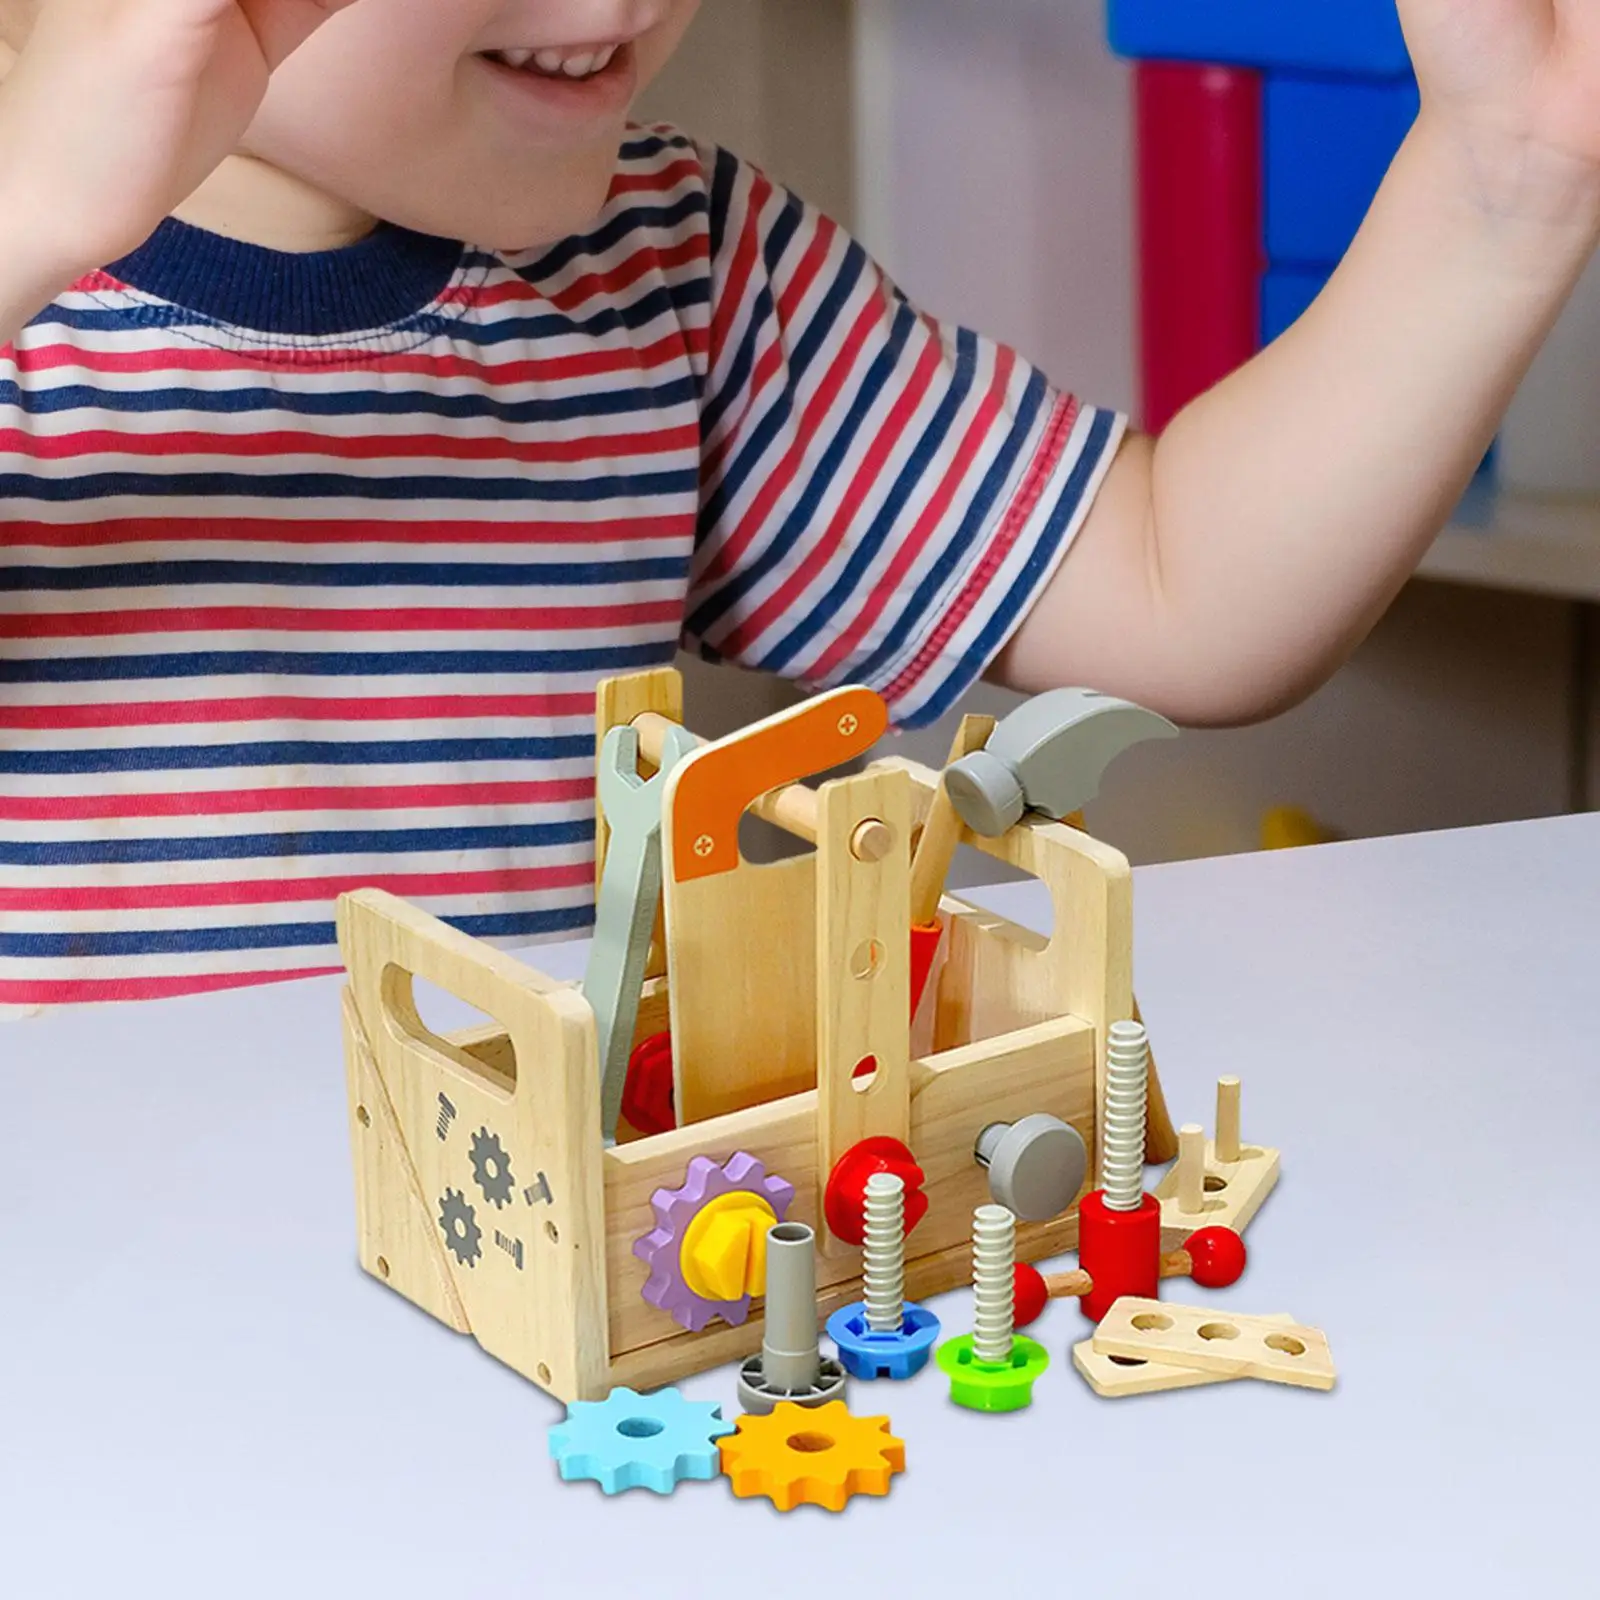 

Tool Box Toys Toddler Take Apart Toy Wooden Tool Set for Matching Patterning Counting Construction Skills Birthday Gifts